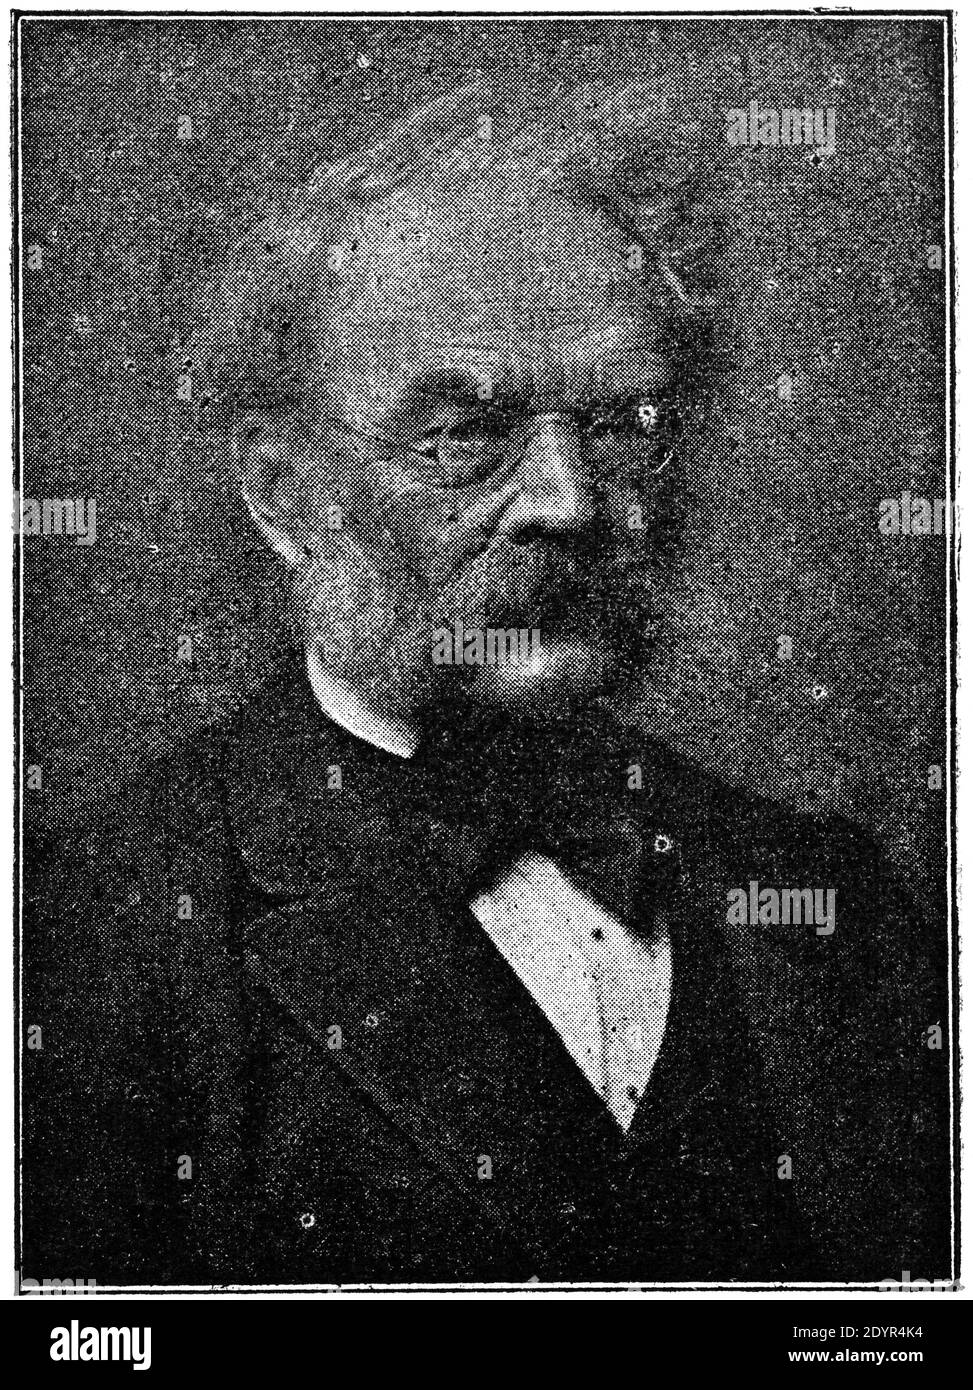 Portrait of Ernst Werner von Siemens - a German electrical engineer, inventor and industrialist. Illustration of the 19th century. Germany. White background. Stock Photo